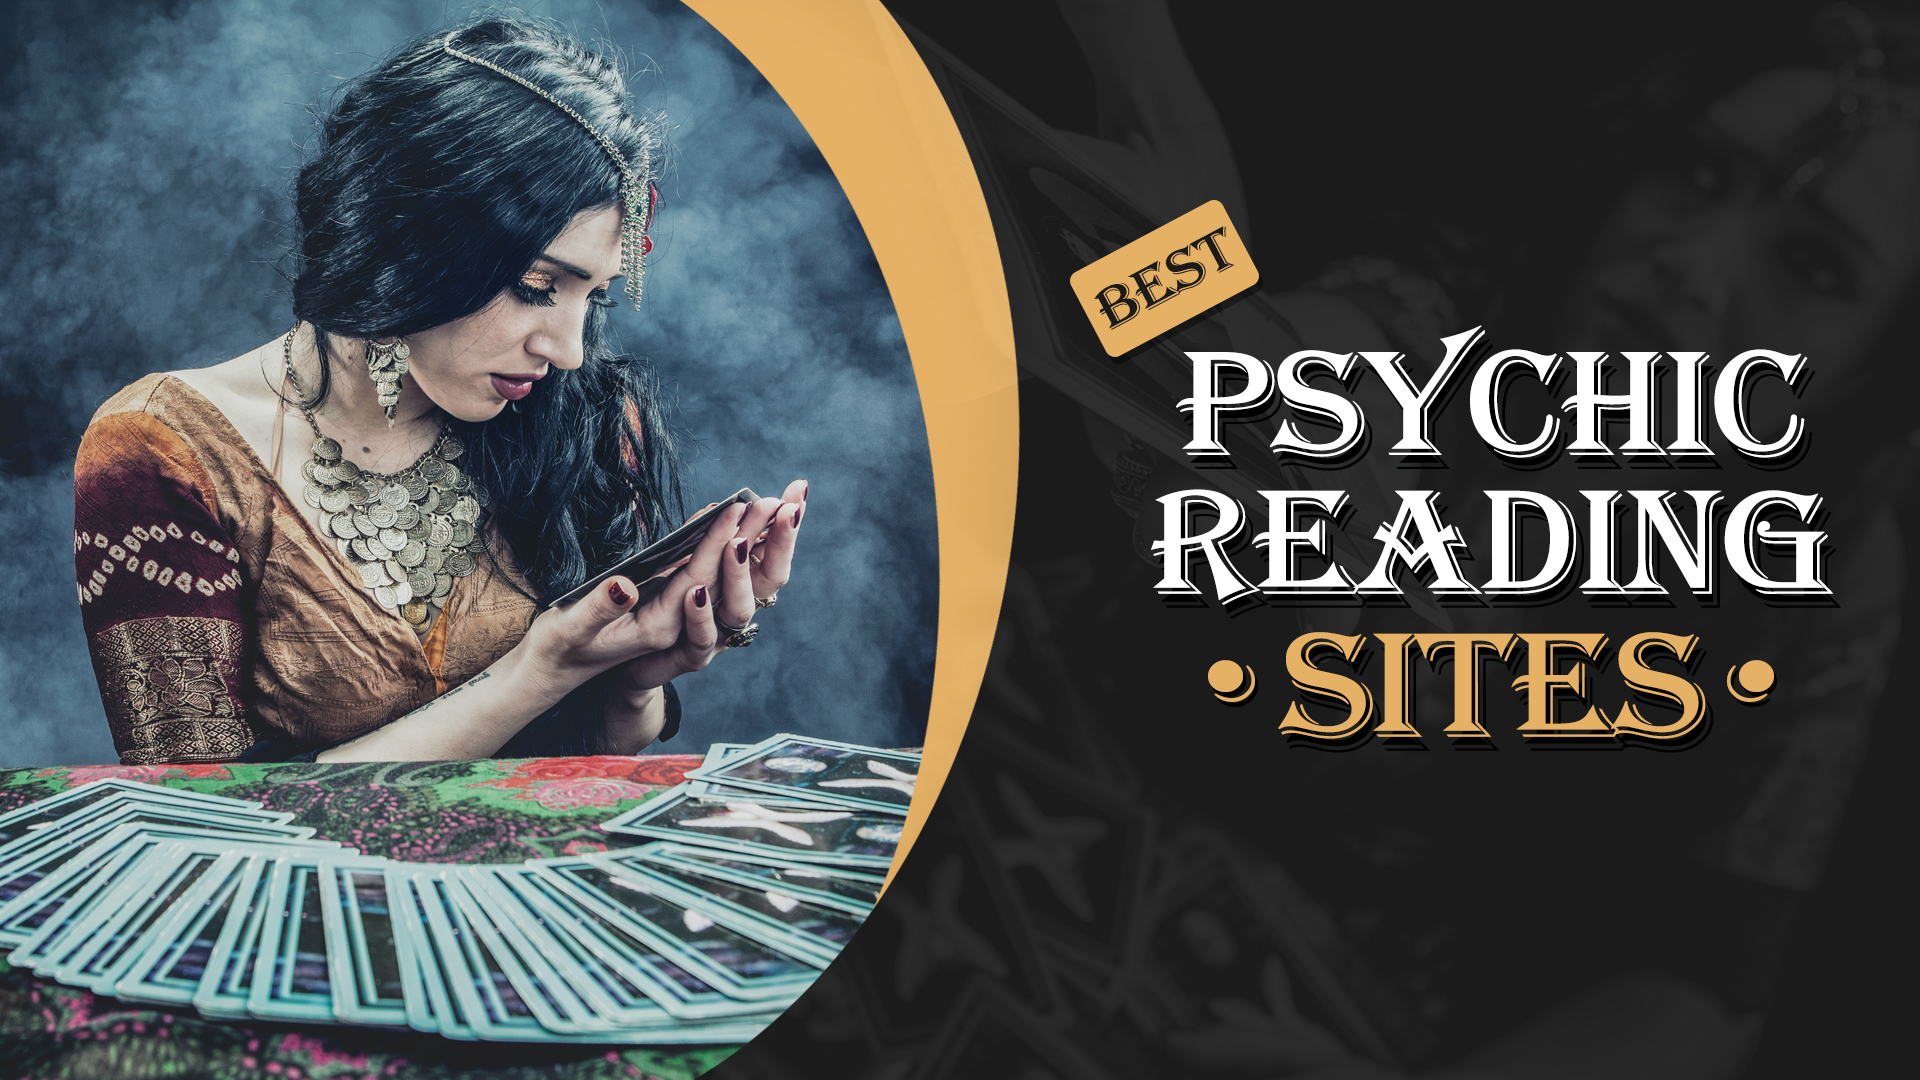 Free live chat tarot card reading